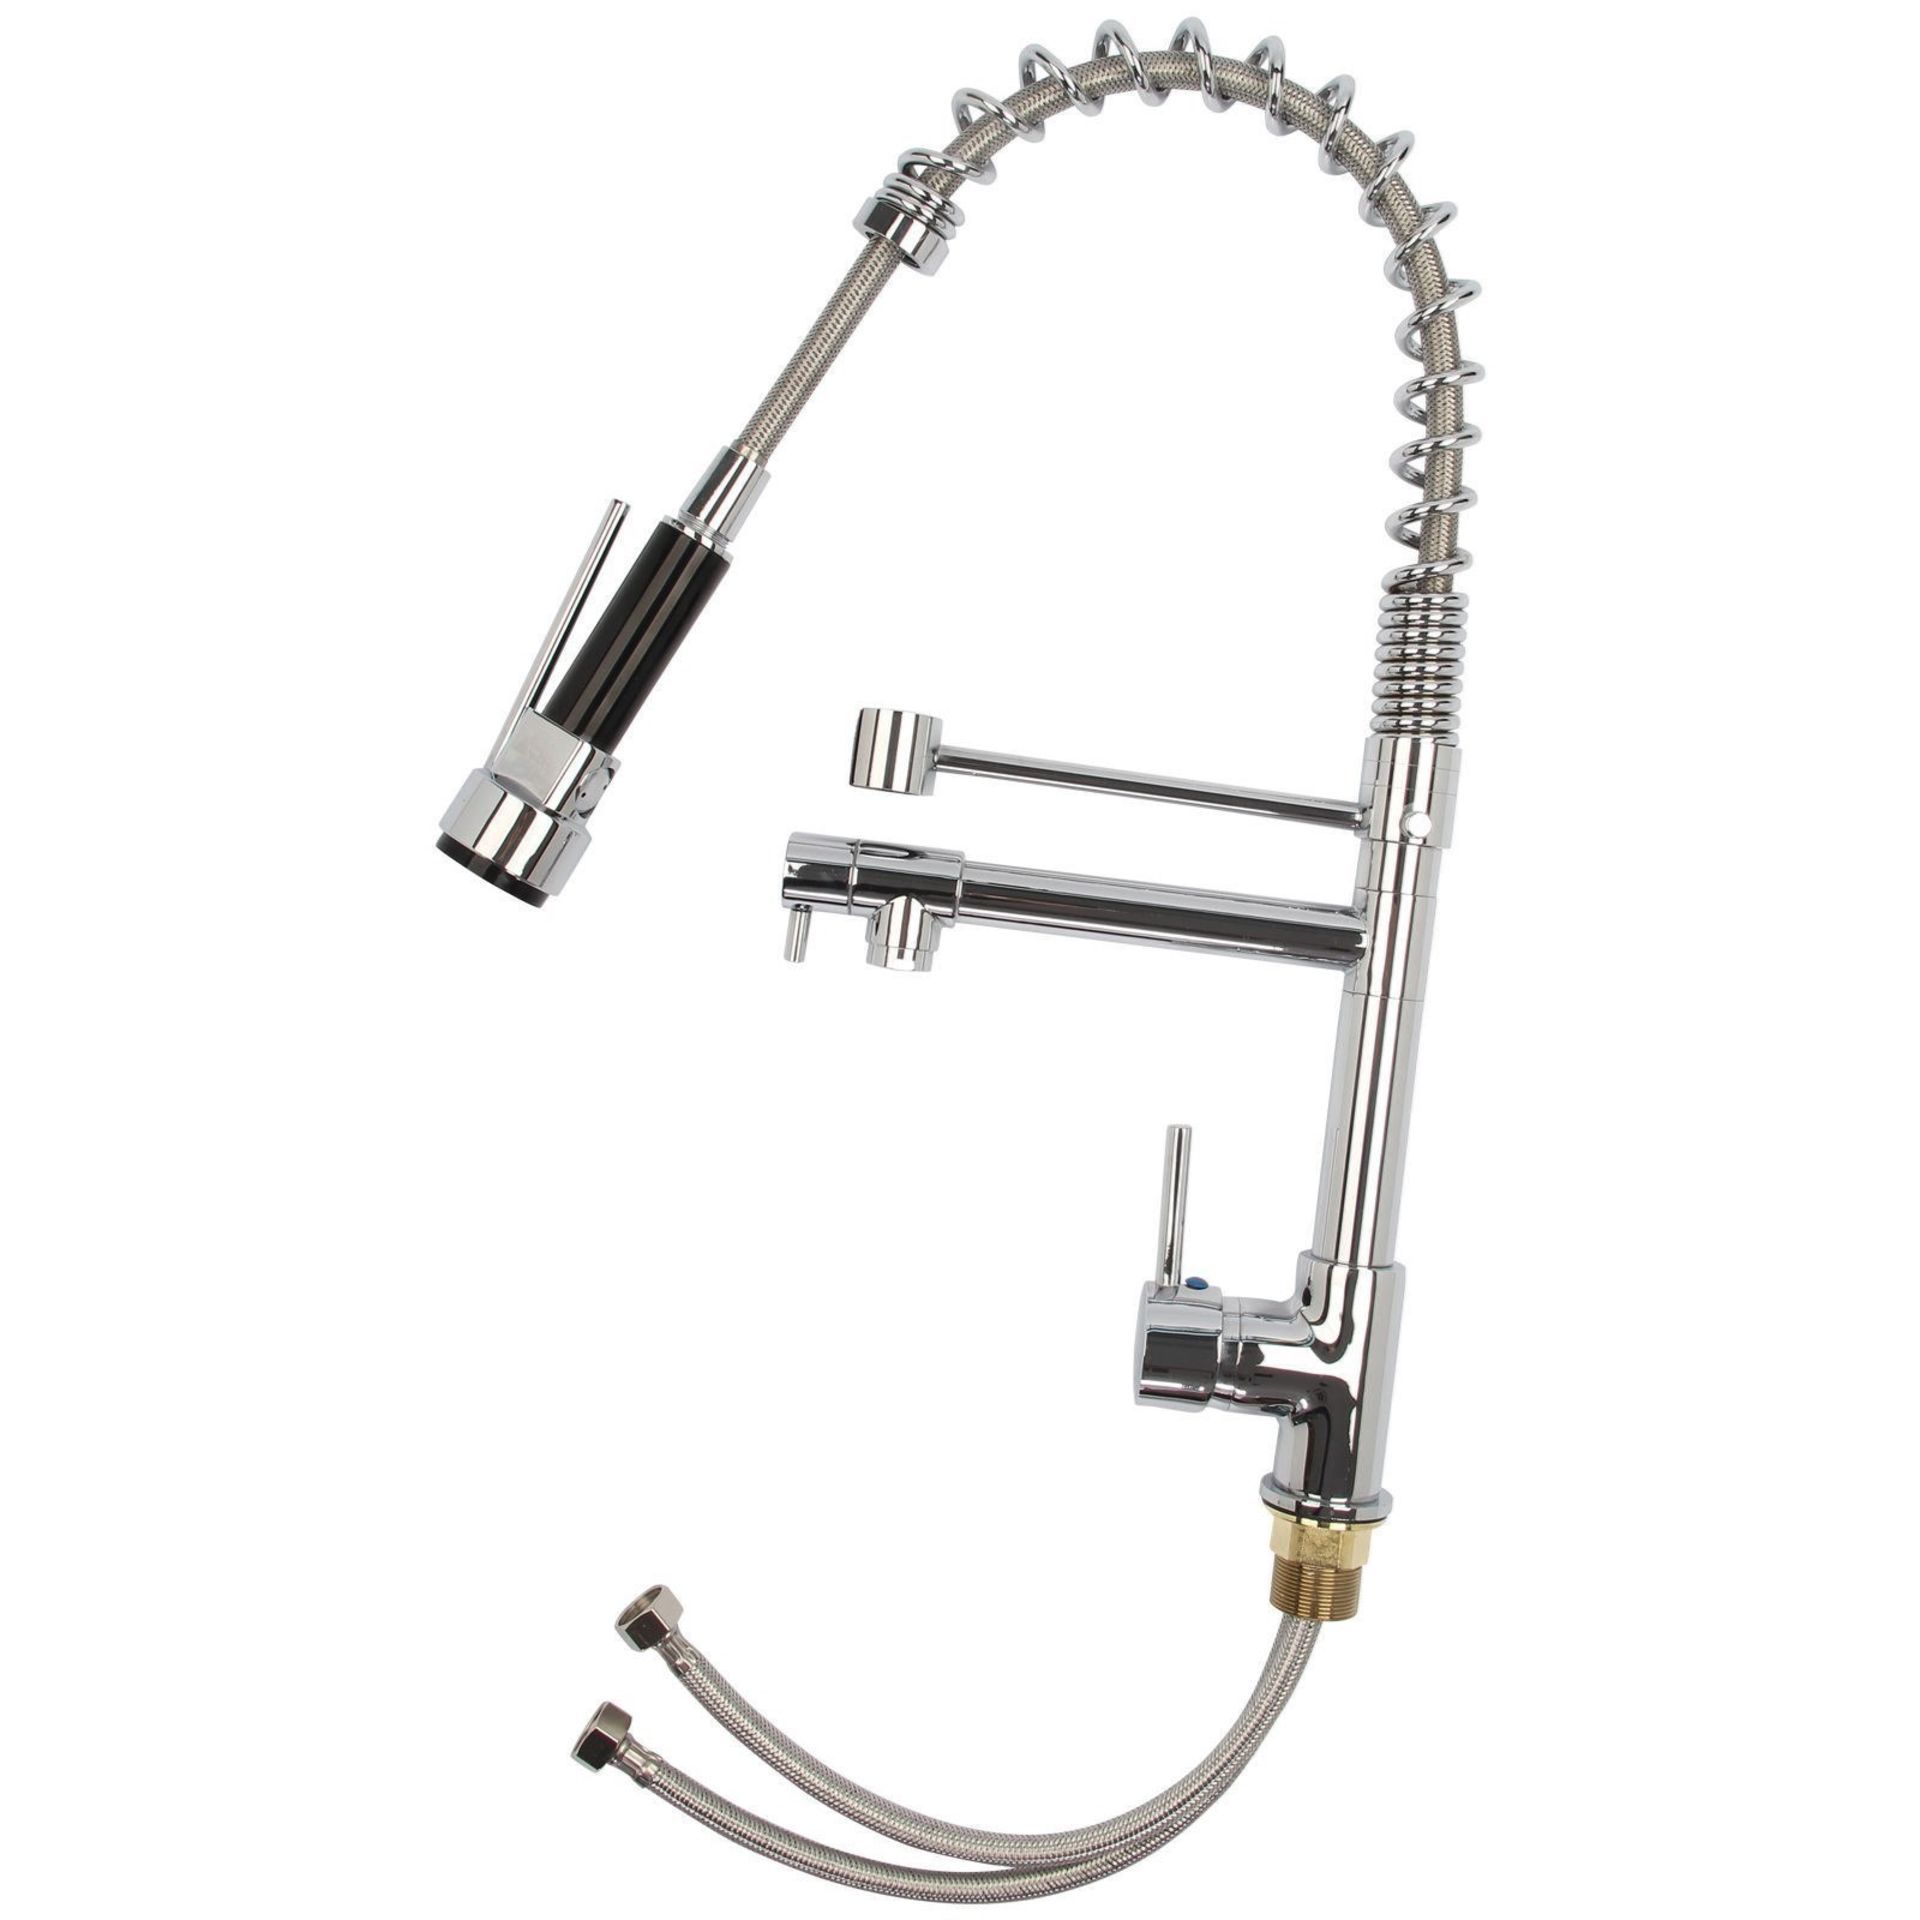 New & Boxed Bentley Modern Monobloc Chrome Brass Pull Out Spray Mixer Tap.RRP £349.99.This Tap... - Image 2 of 2